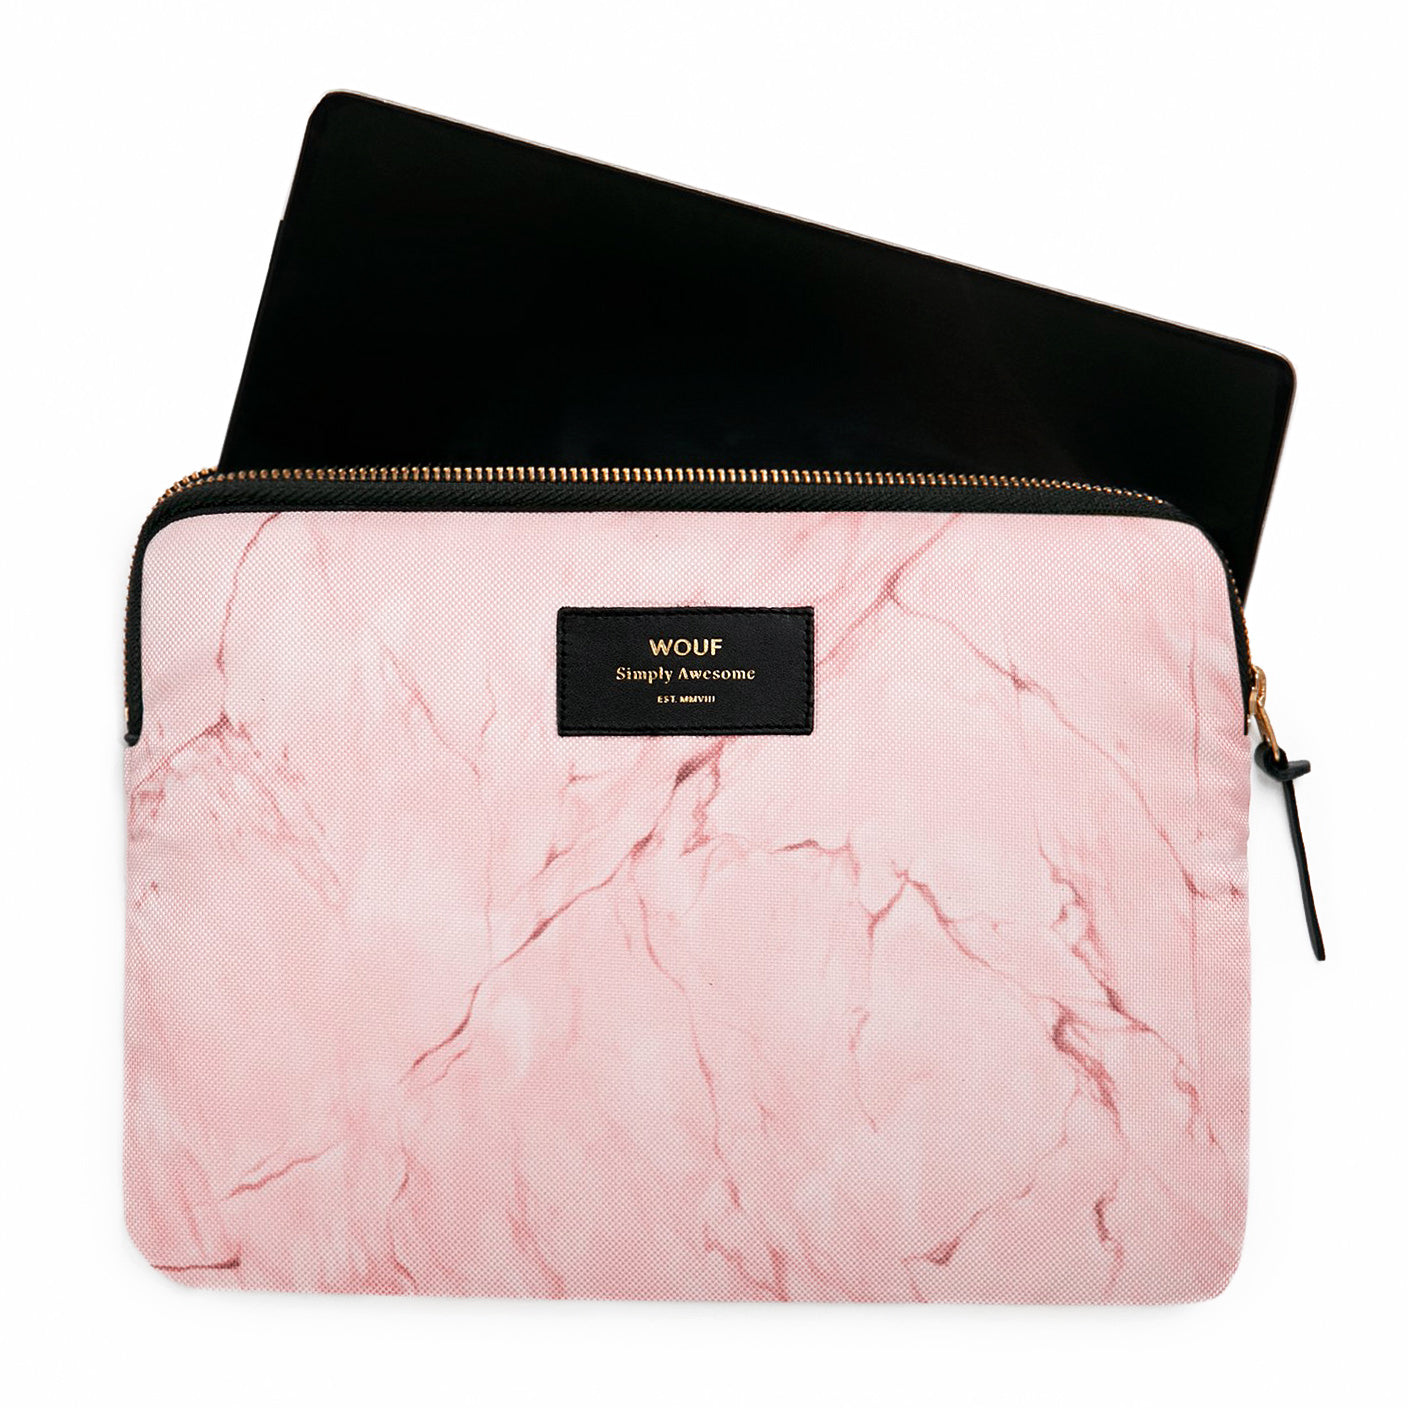 IPAD CASE, PALE PINK MARBLE